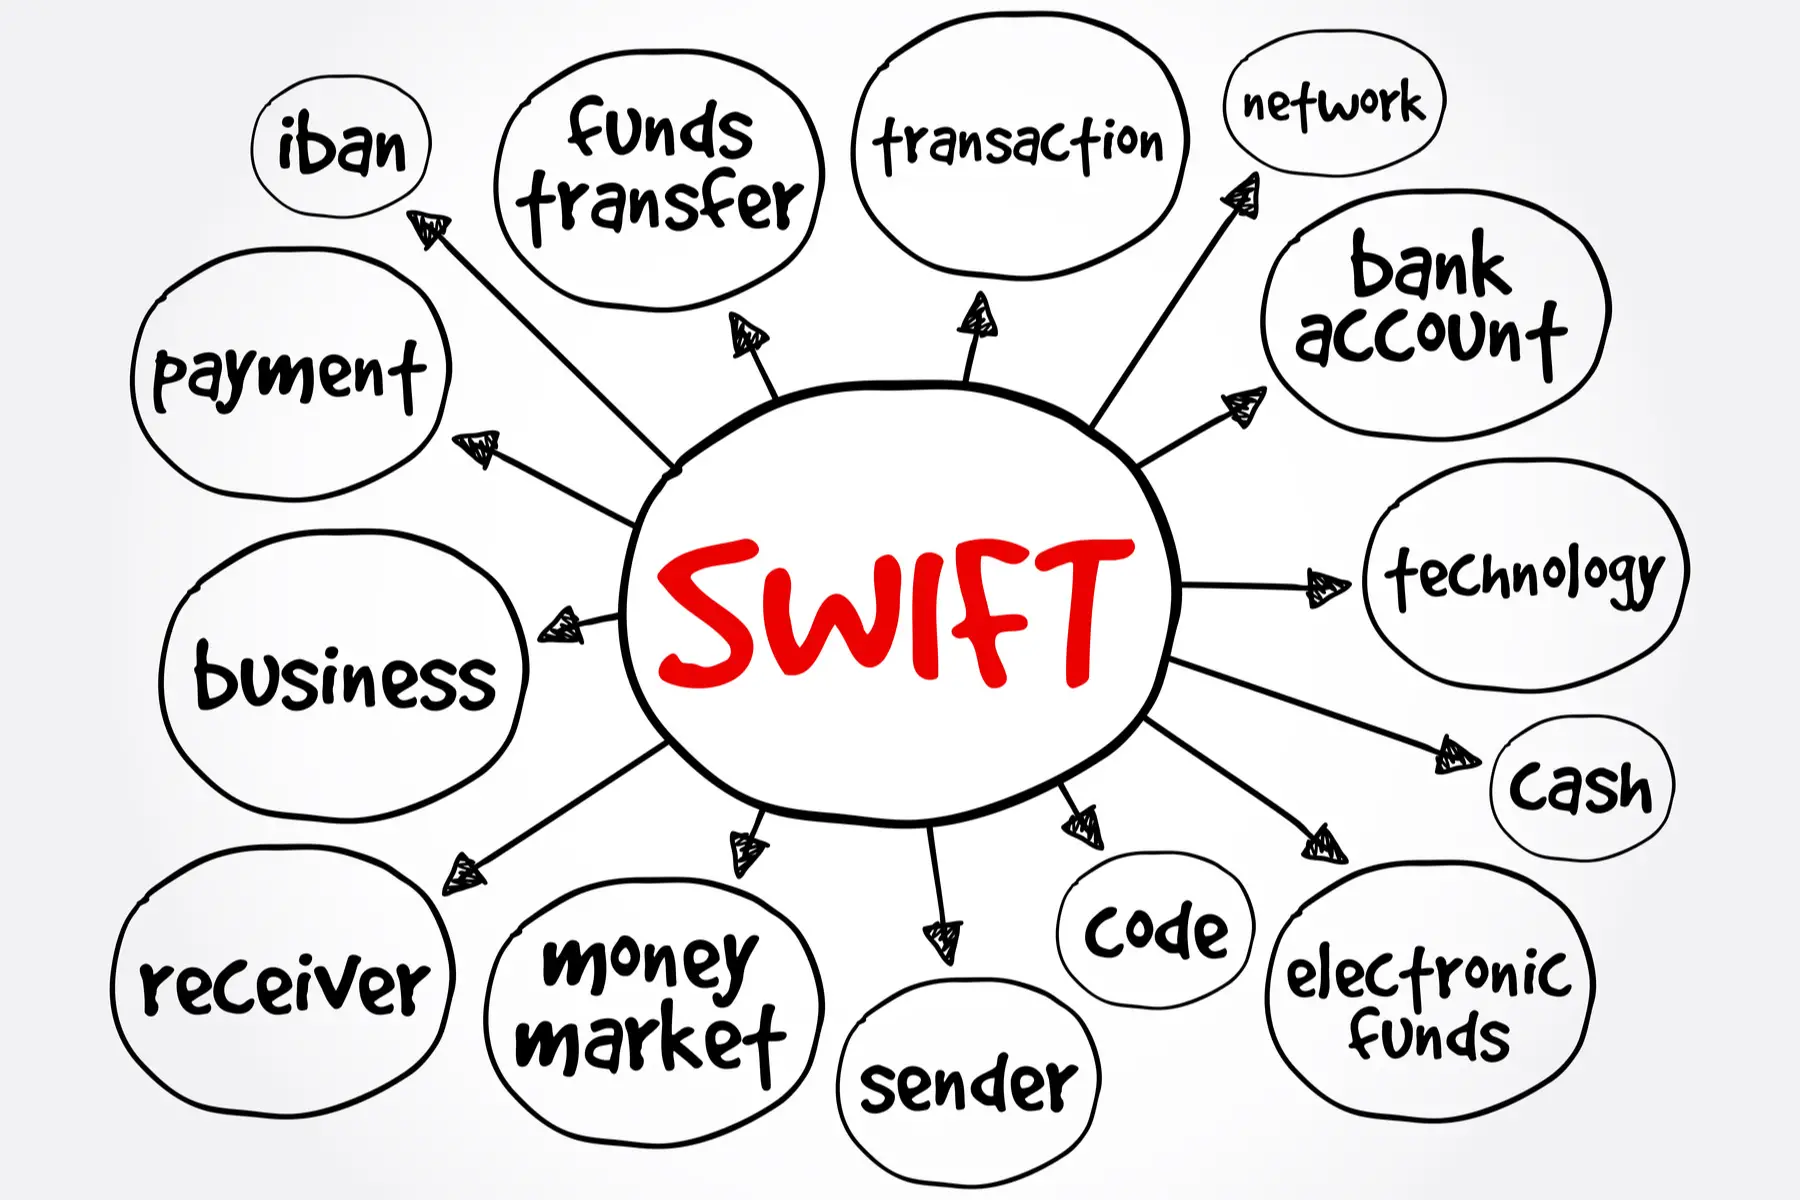 a mind map of how the SWIFT system connects international banks and allows money transfers